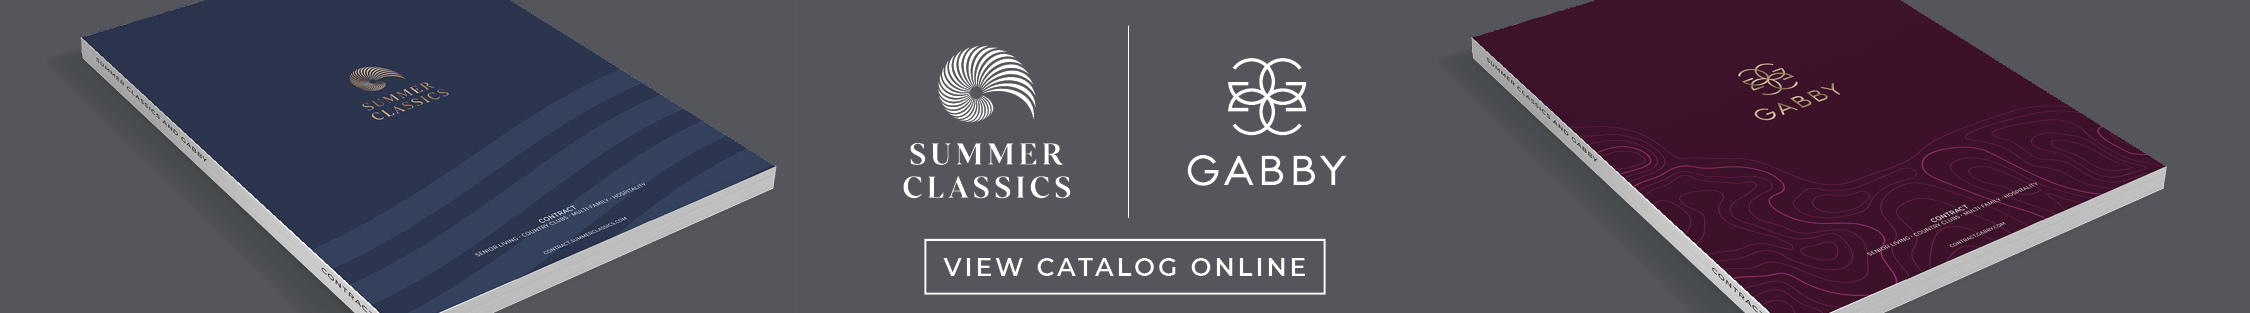 View Summer Classics and Gabby Contract Catalogs Online